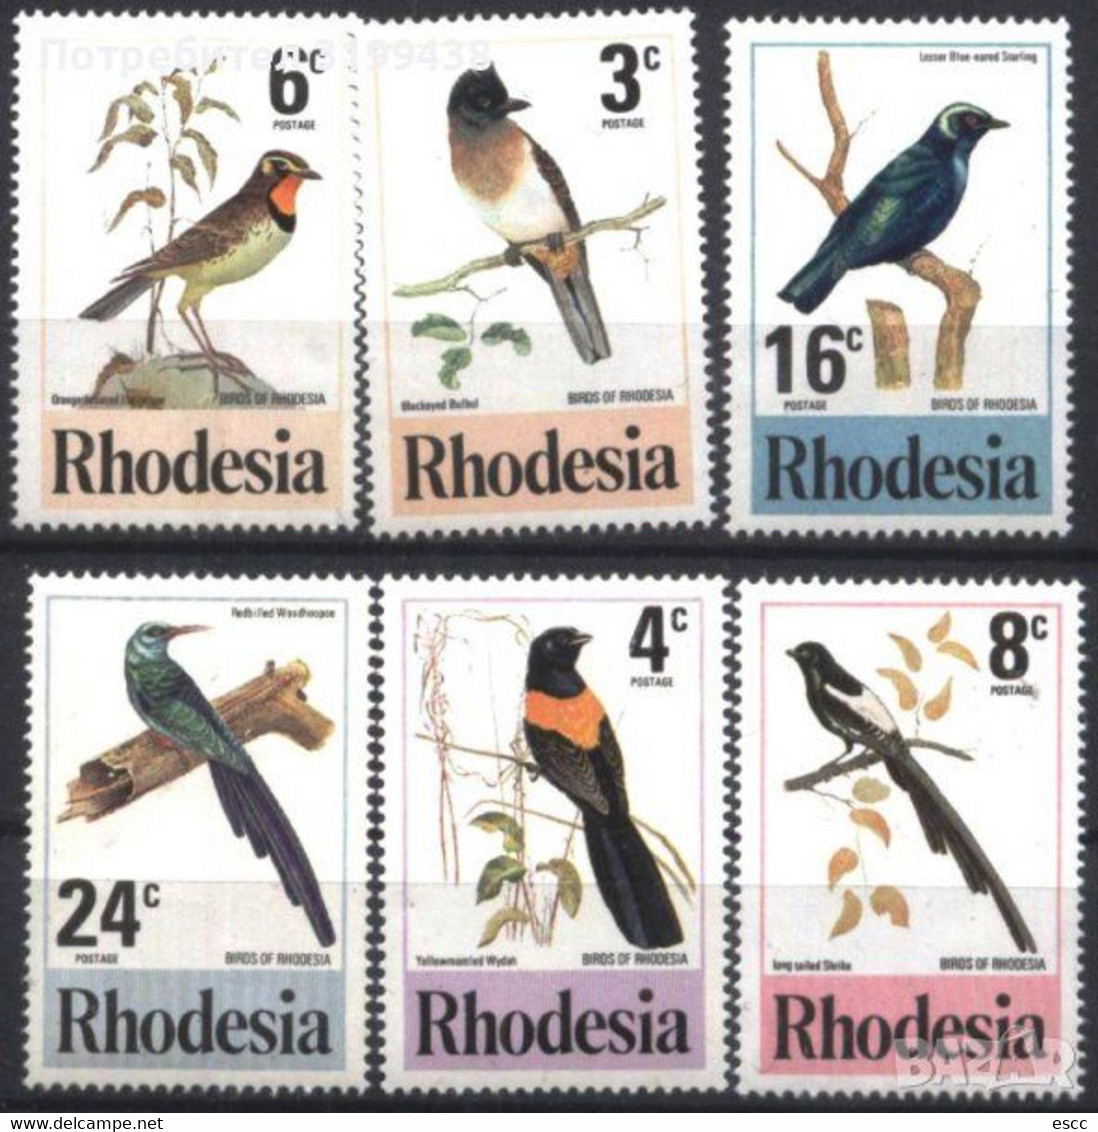 Mint Stamps Fauna Birds 1977 From Rhodesia - Songbirds & Tree Dwellers